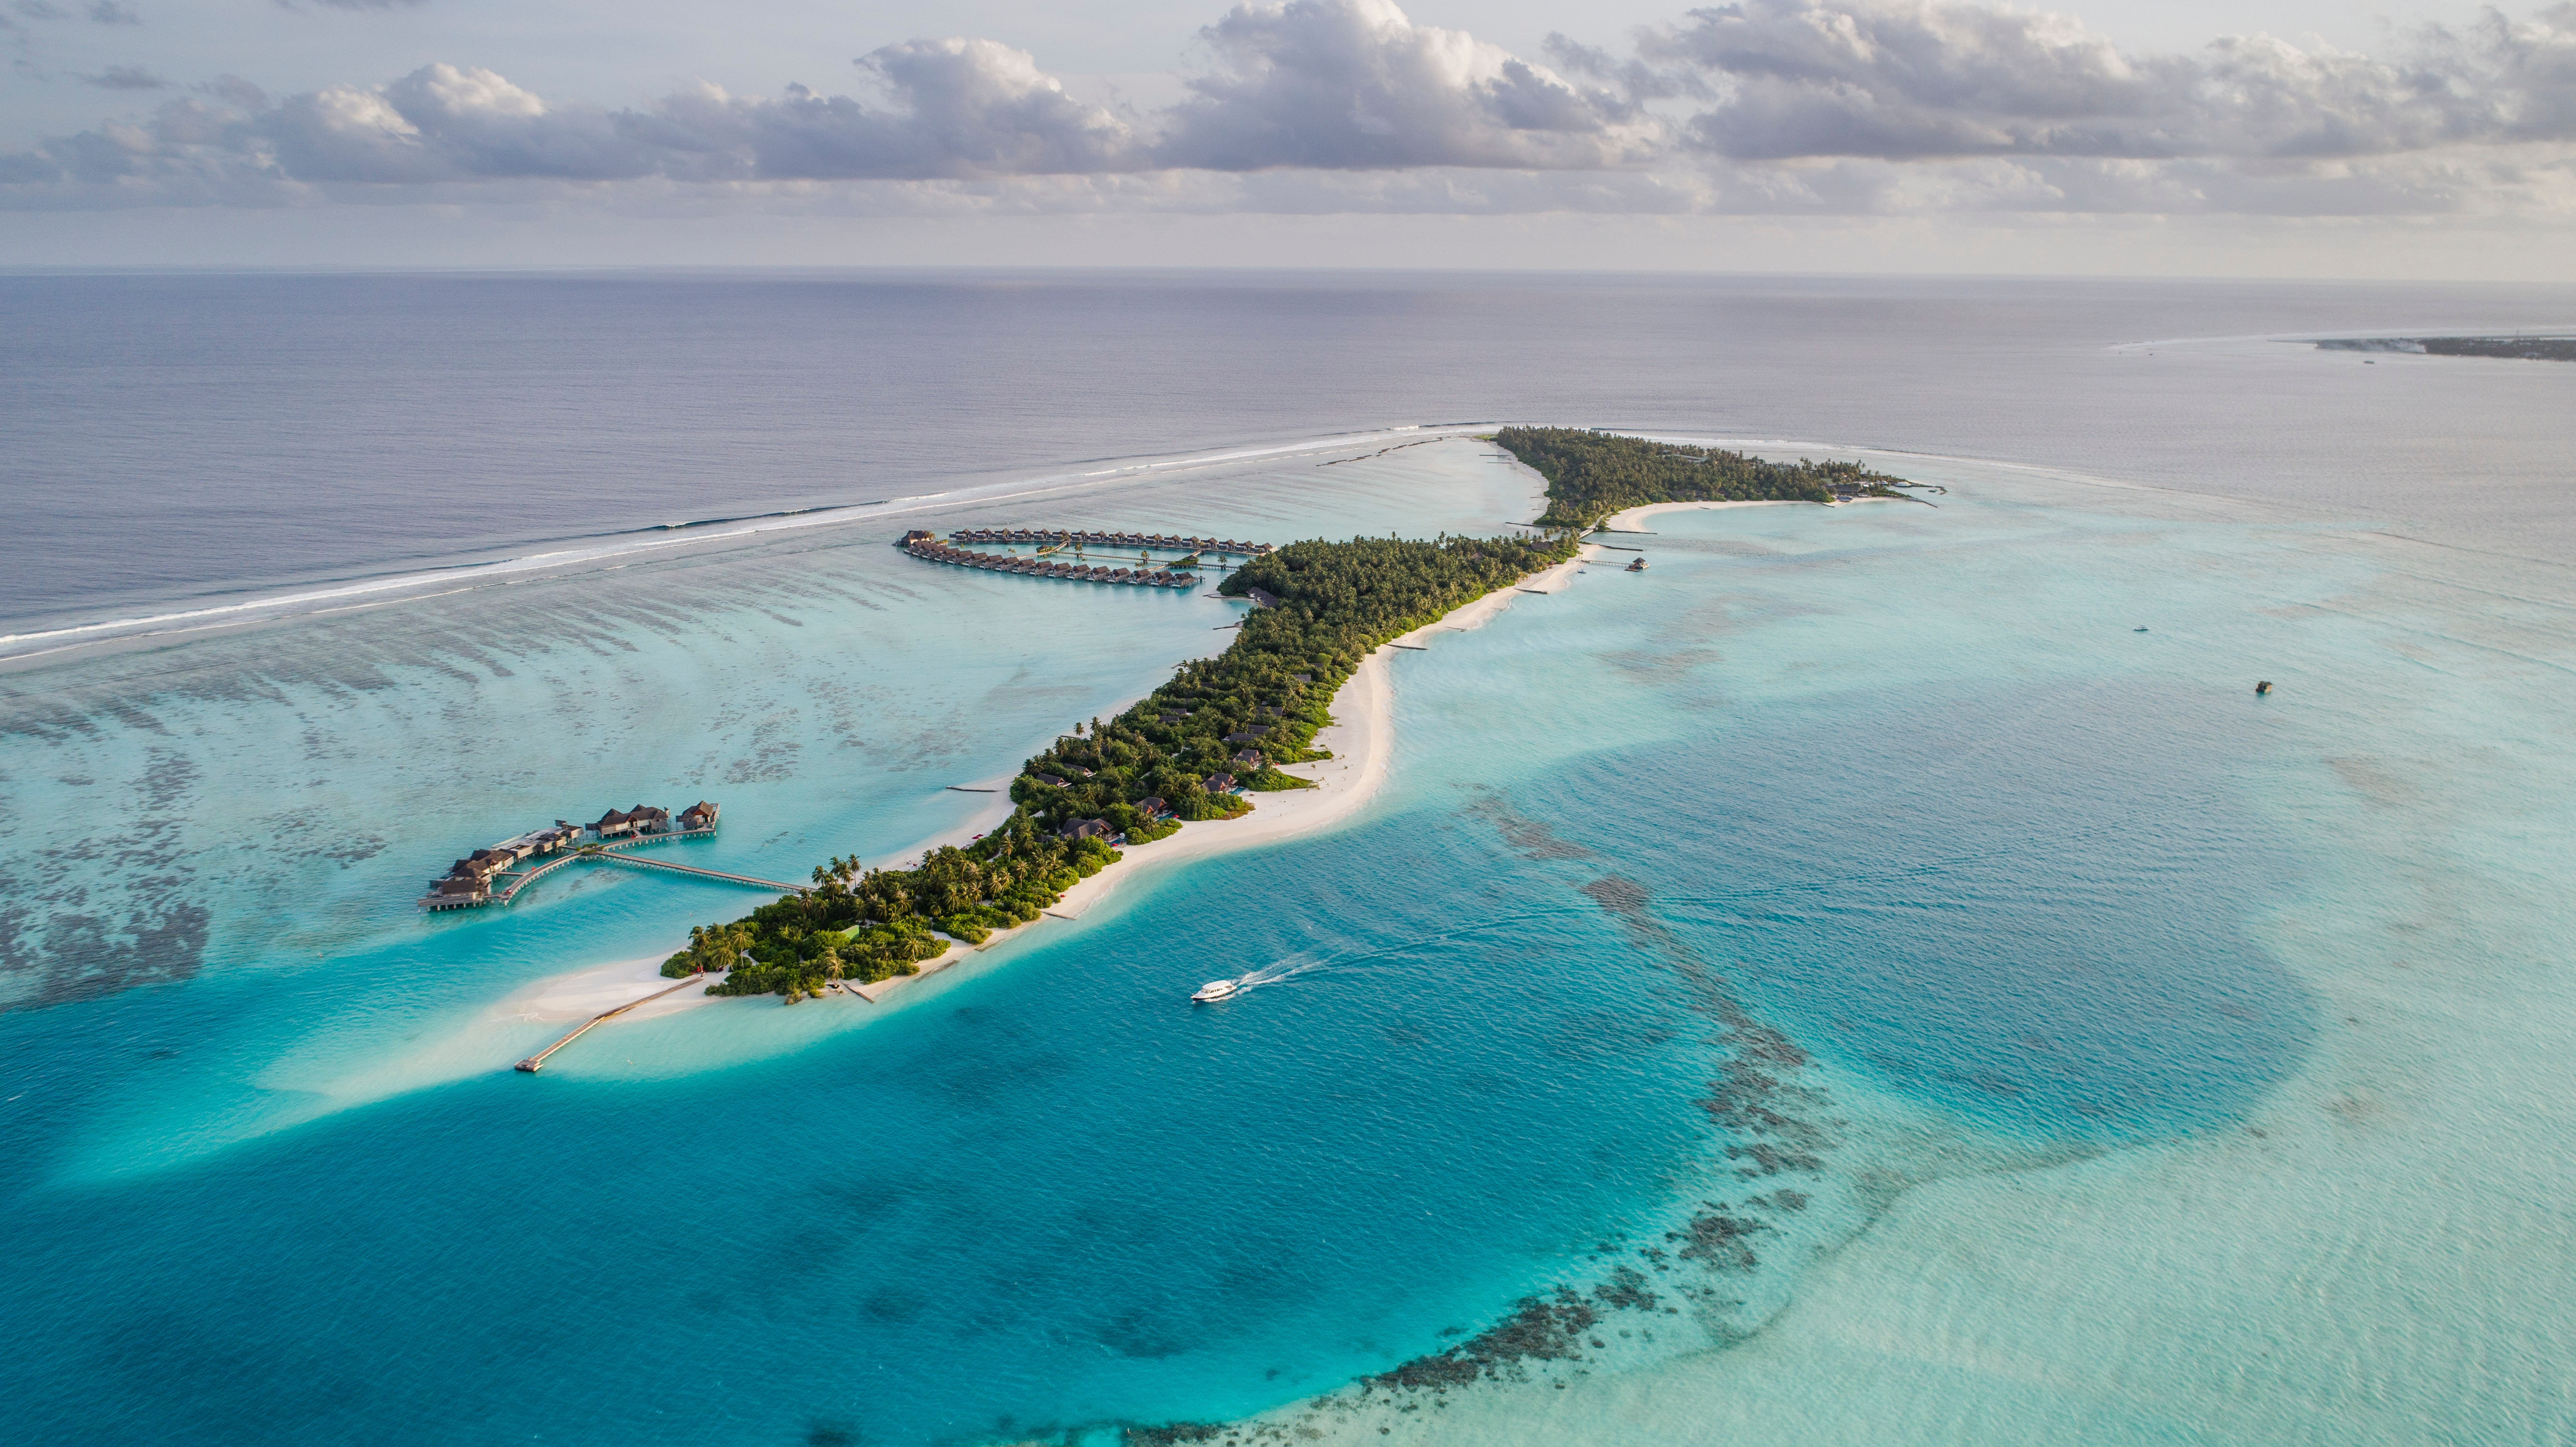 maldives, nature, view from above, sky, horizon, ocean, island